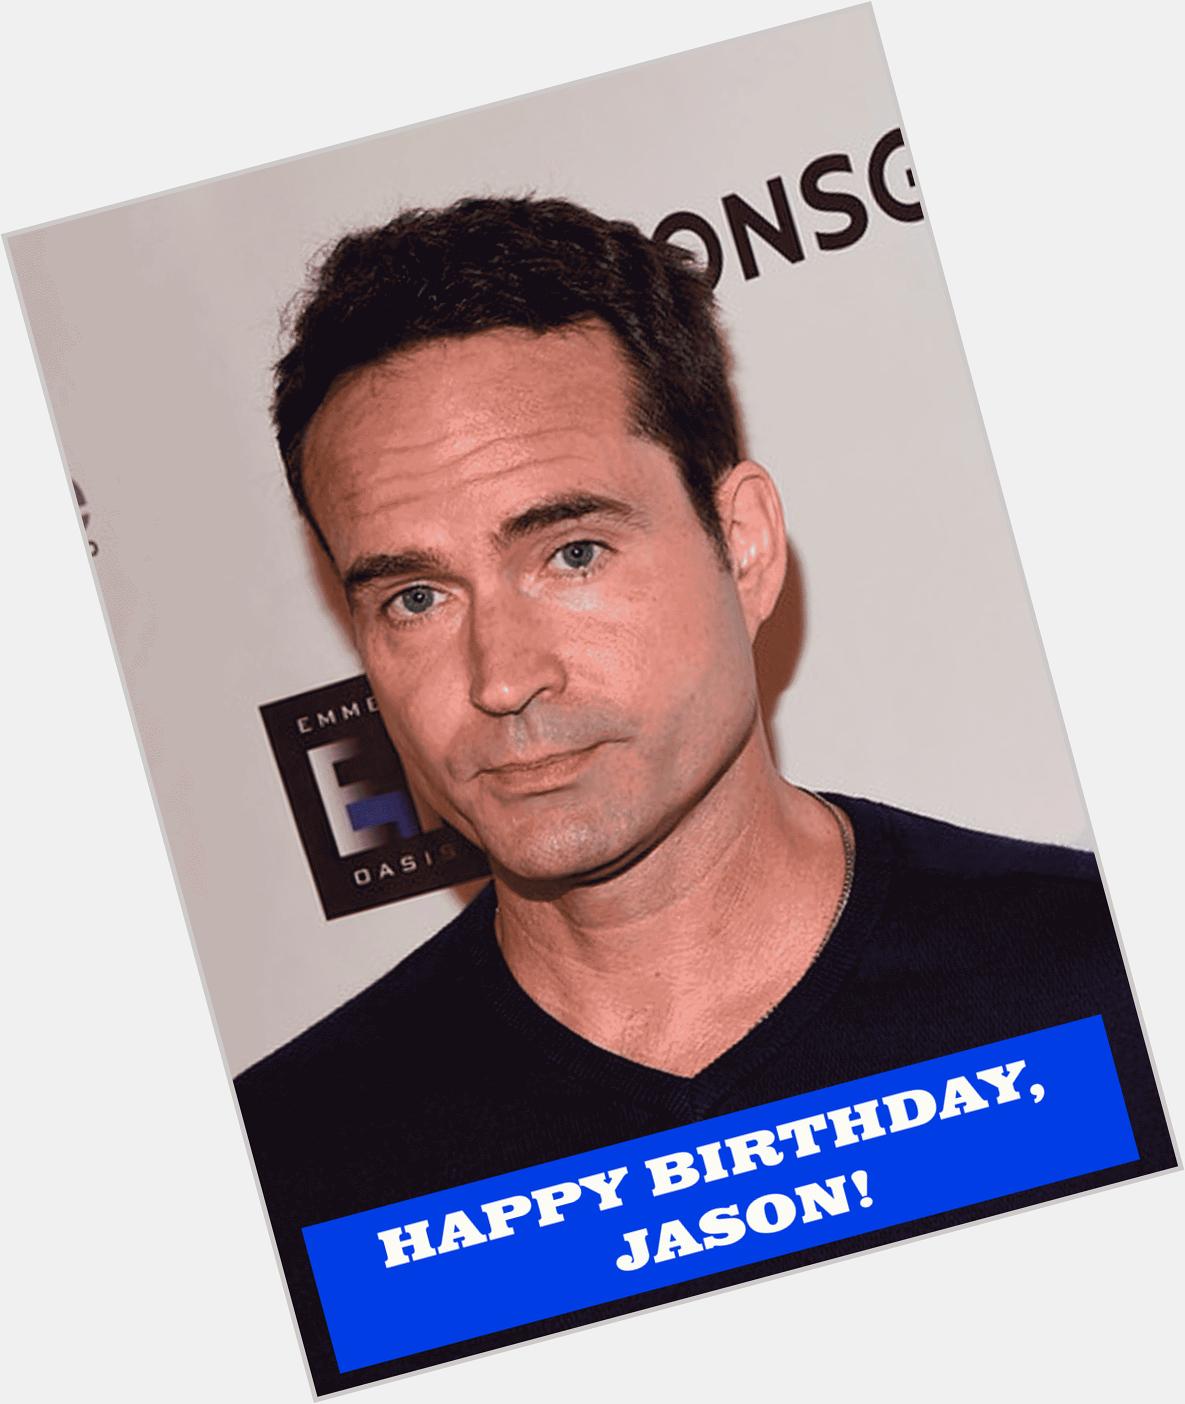 All The Lost Boys fans everywhere would like to wish Jason Patric a Happy Birthday!  